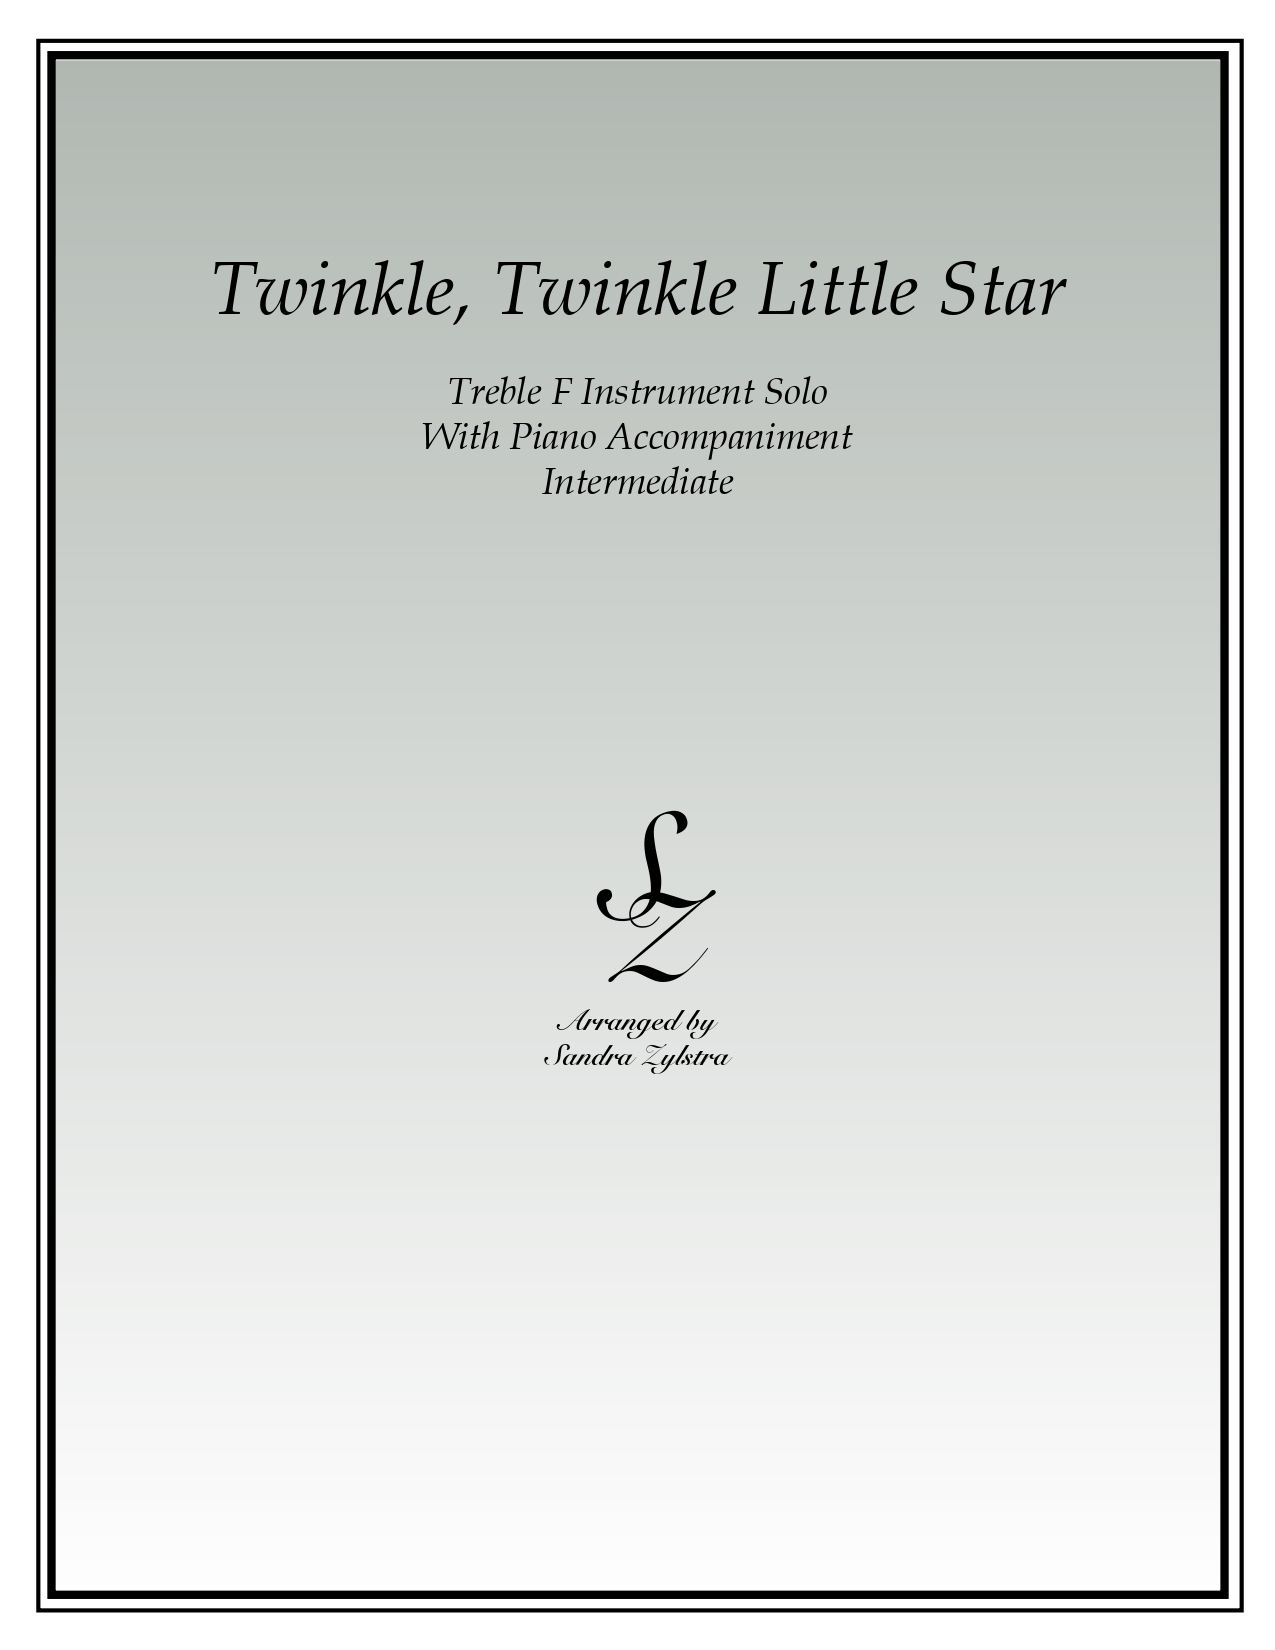 Twinkle Twinkle Little Star F instrument solo part cover page 00011